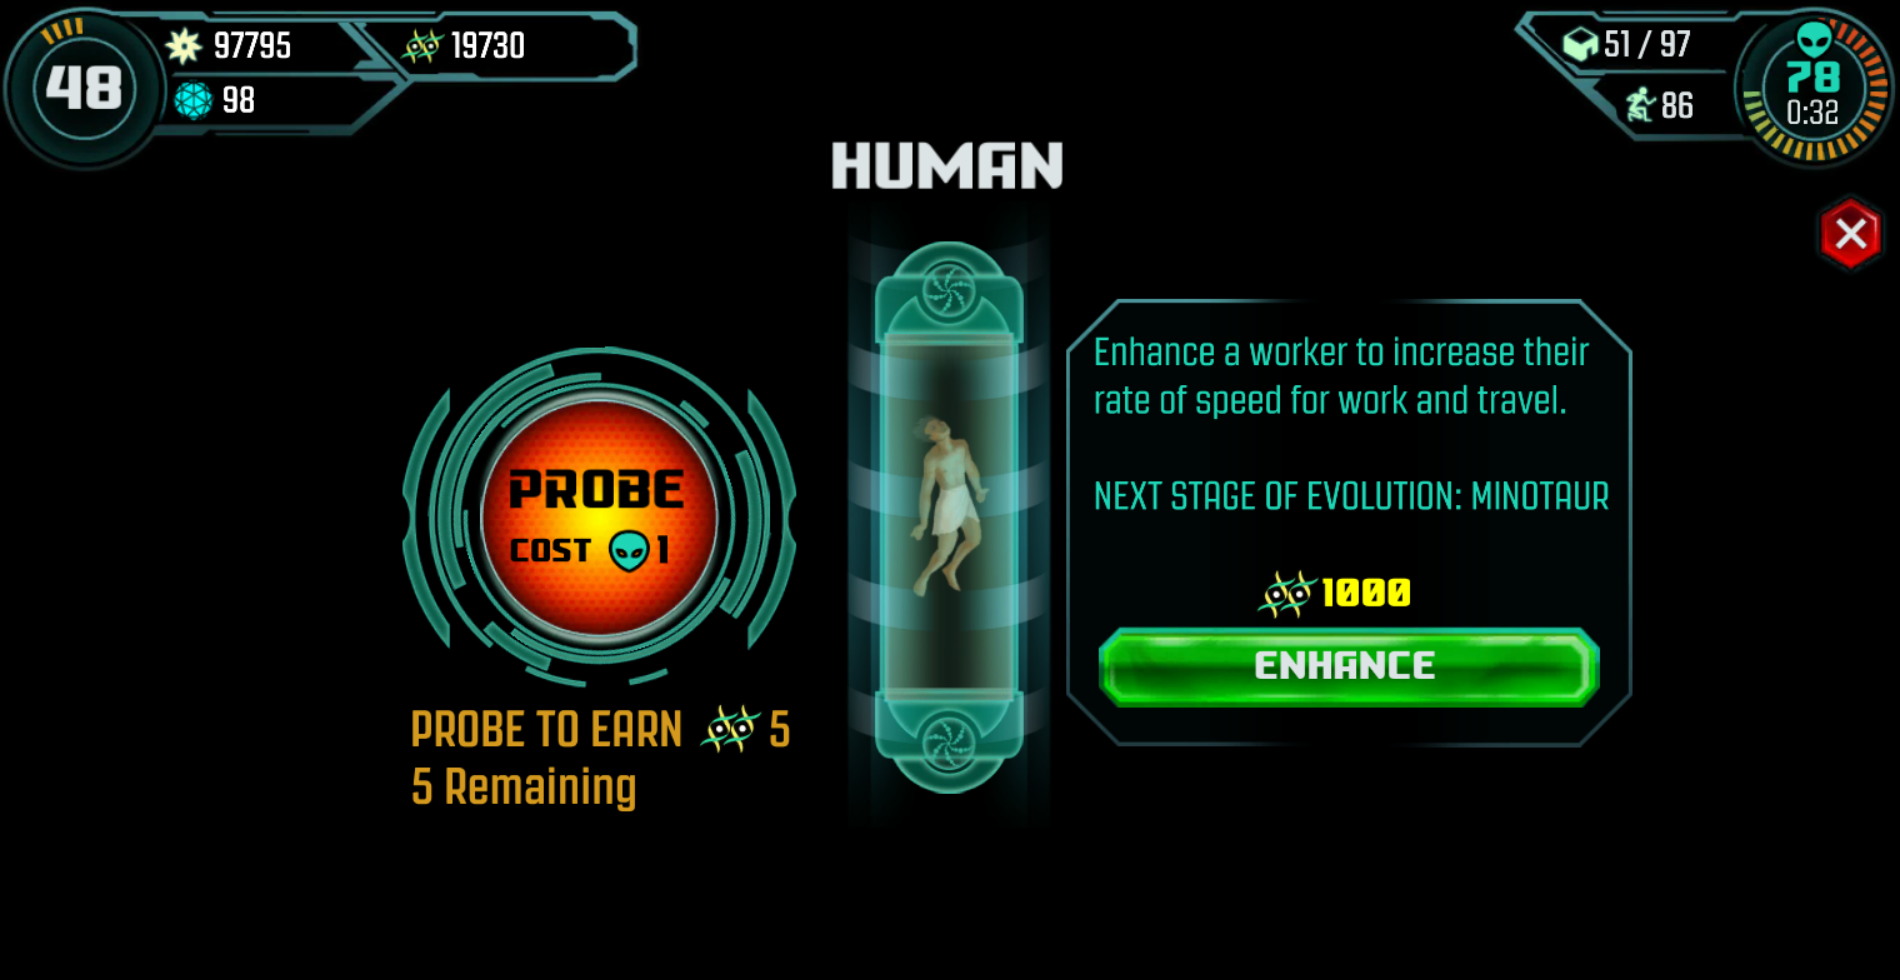 Ancient Aliens: The Game - screenshot 6